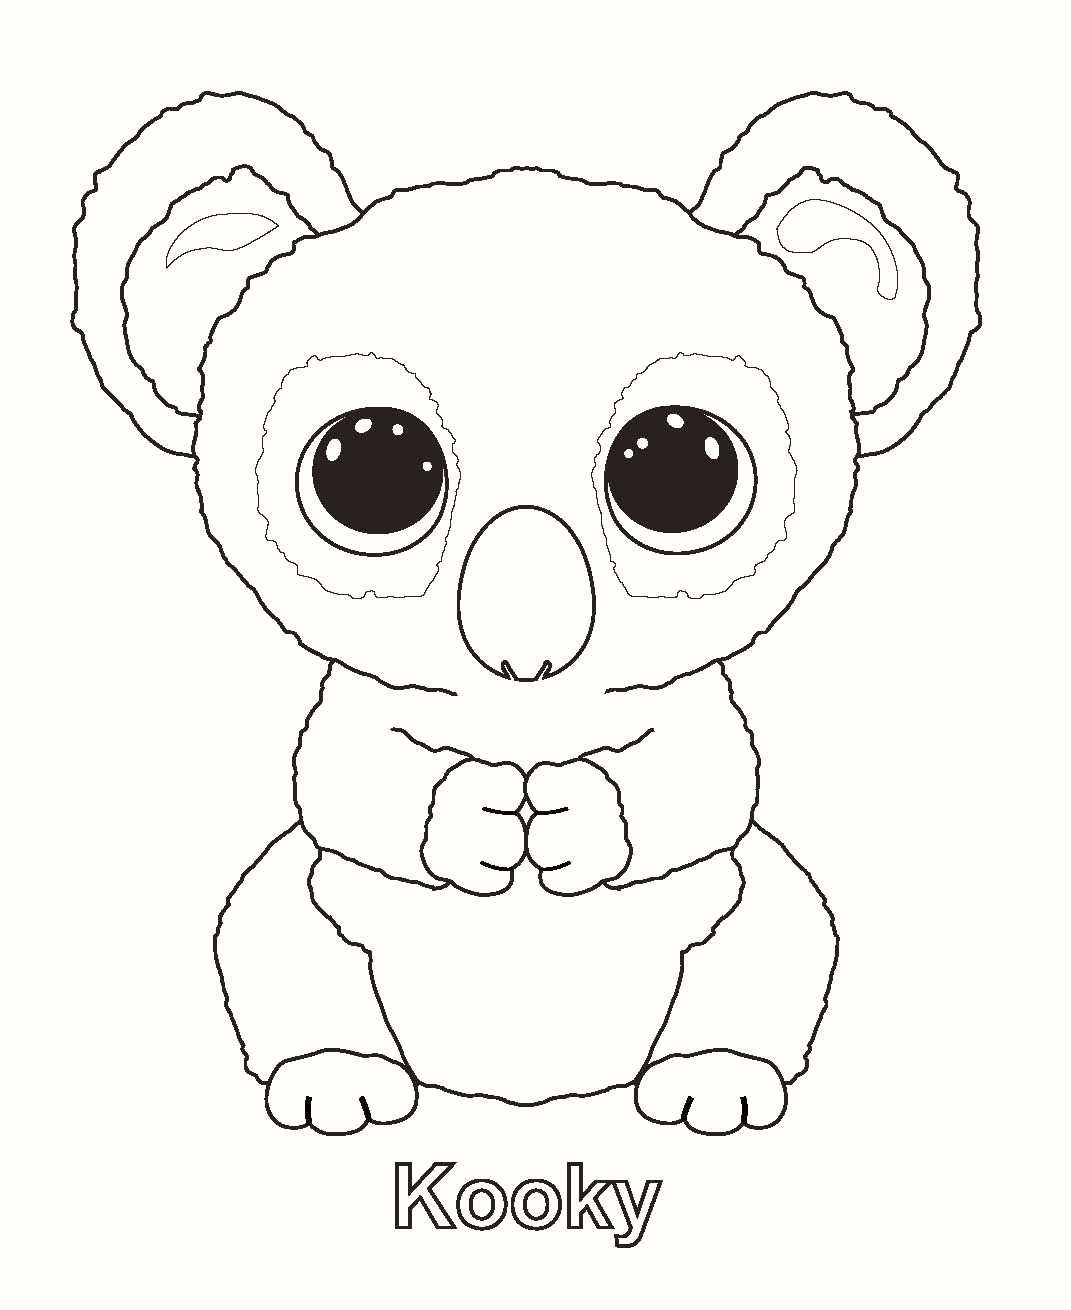 Free Printable Beanie Boo Coloring Pages Beautiful Beanie Boo - Free Printable Beanie Boo Coloring Pages